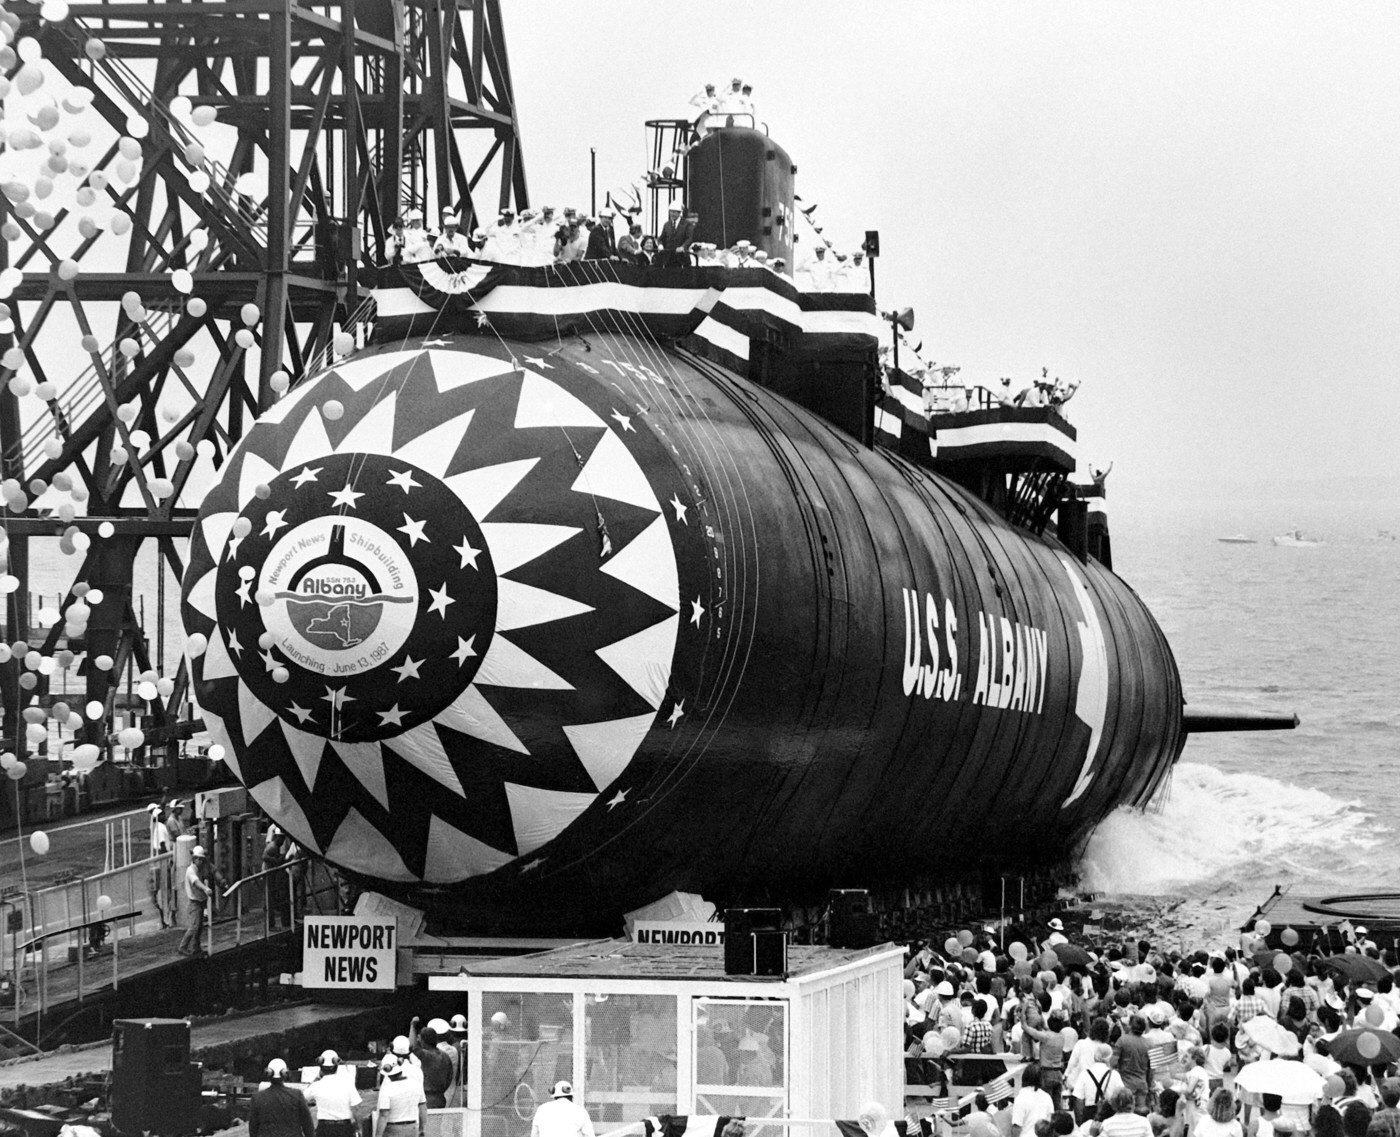 ssn-753 uss albany launching ceremony june 1987